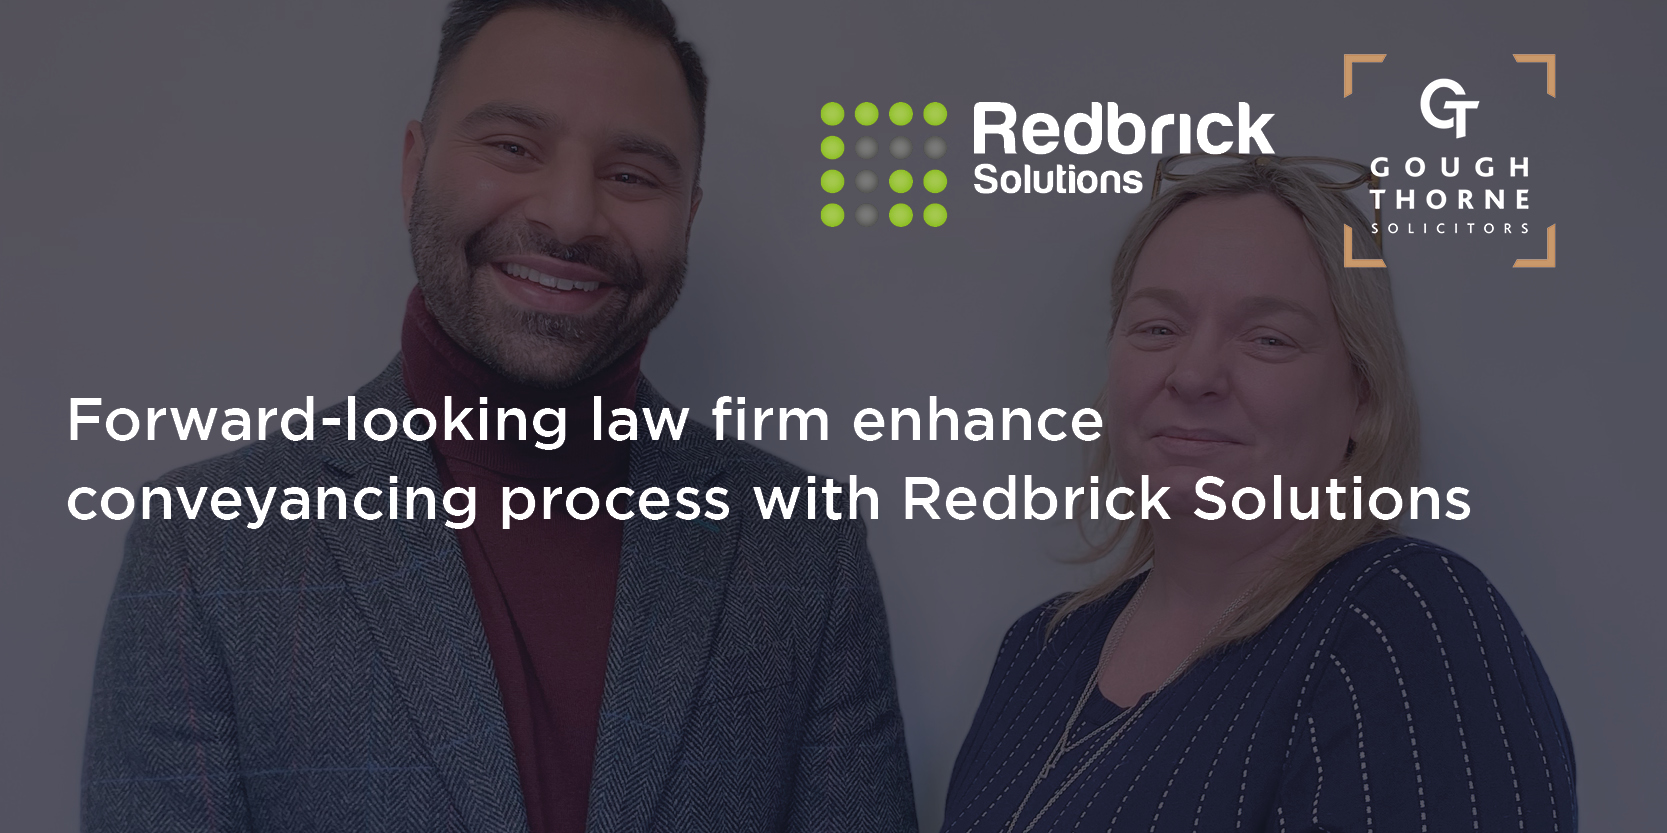 Forward-looking law firm enhance conveyancing process with Redbrick Solutions